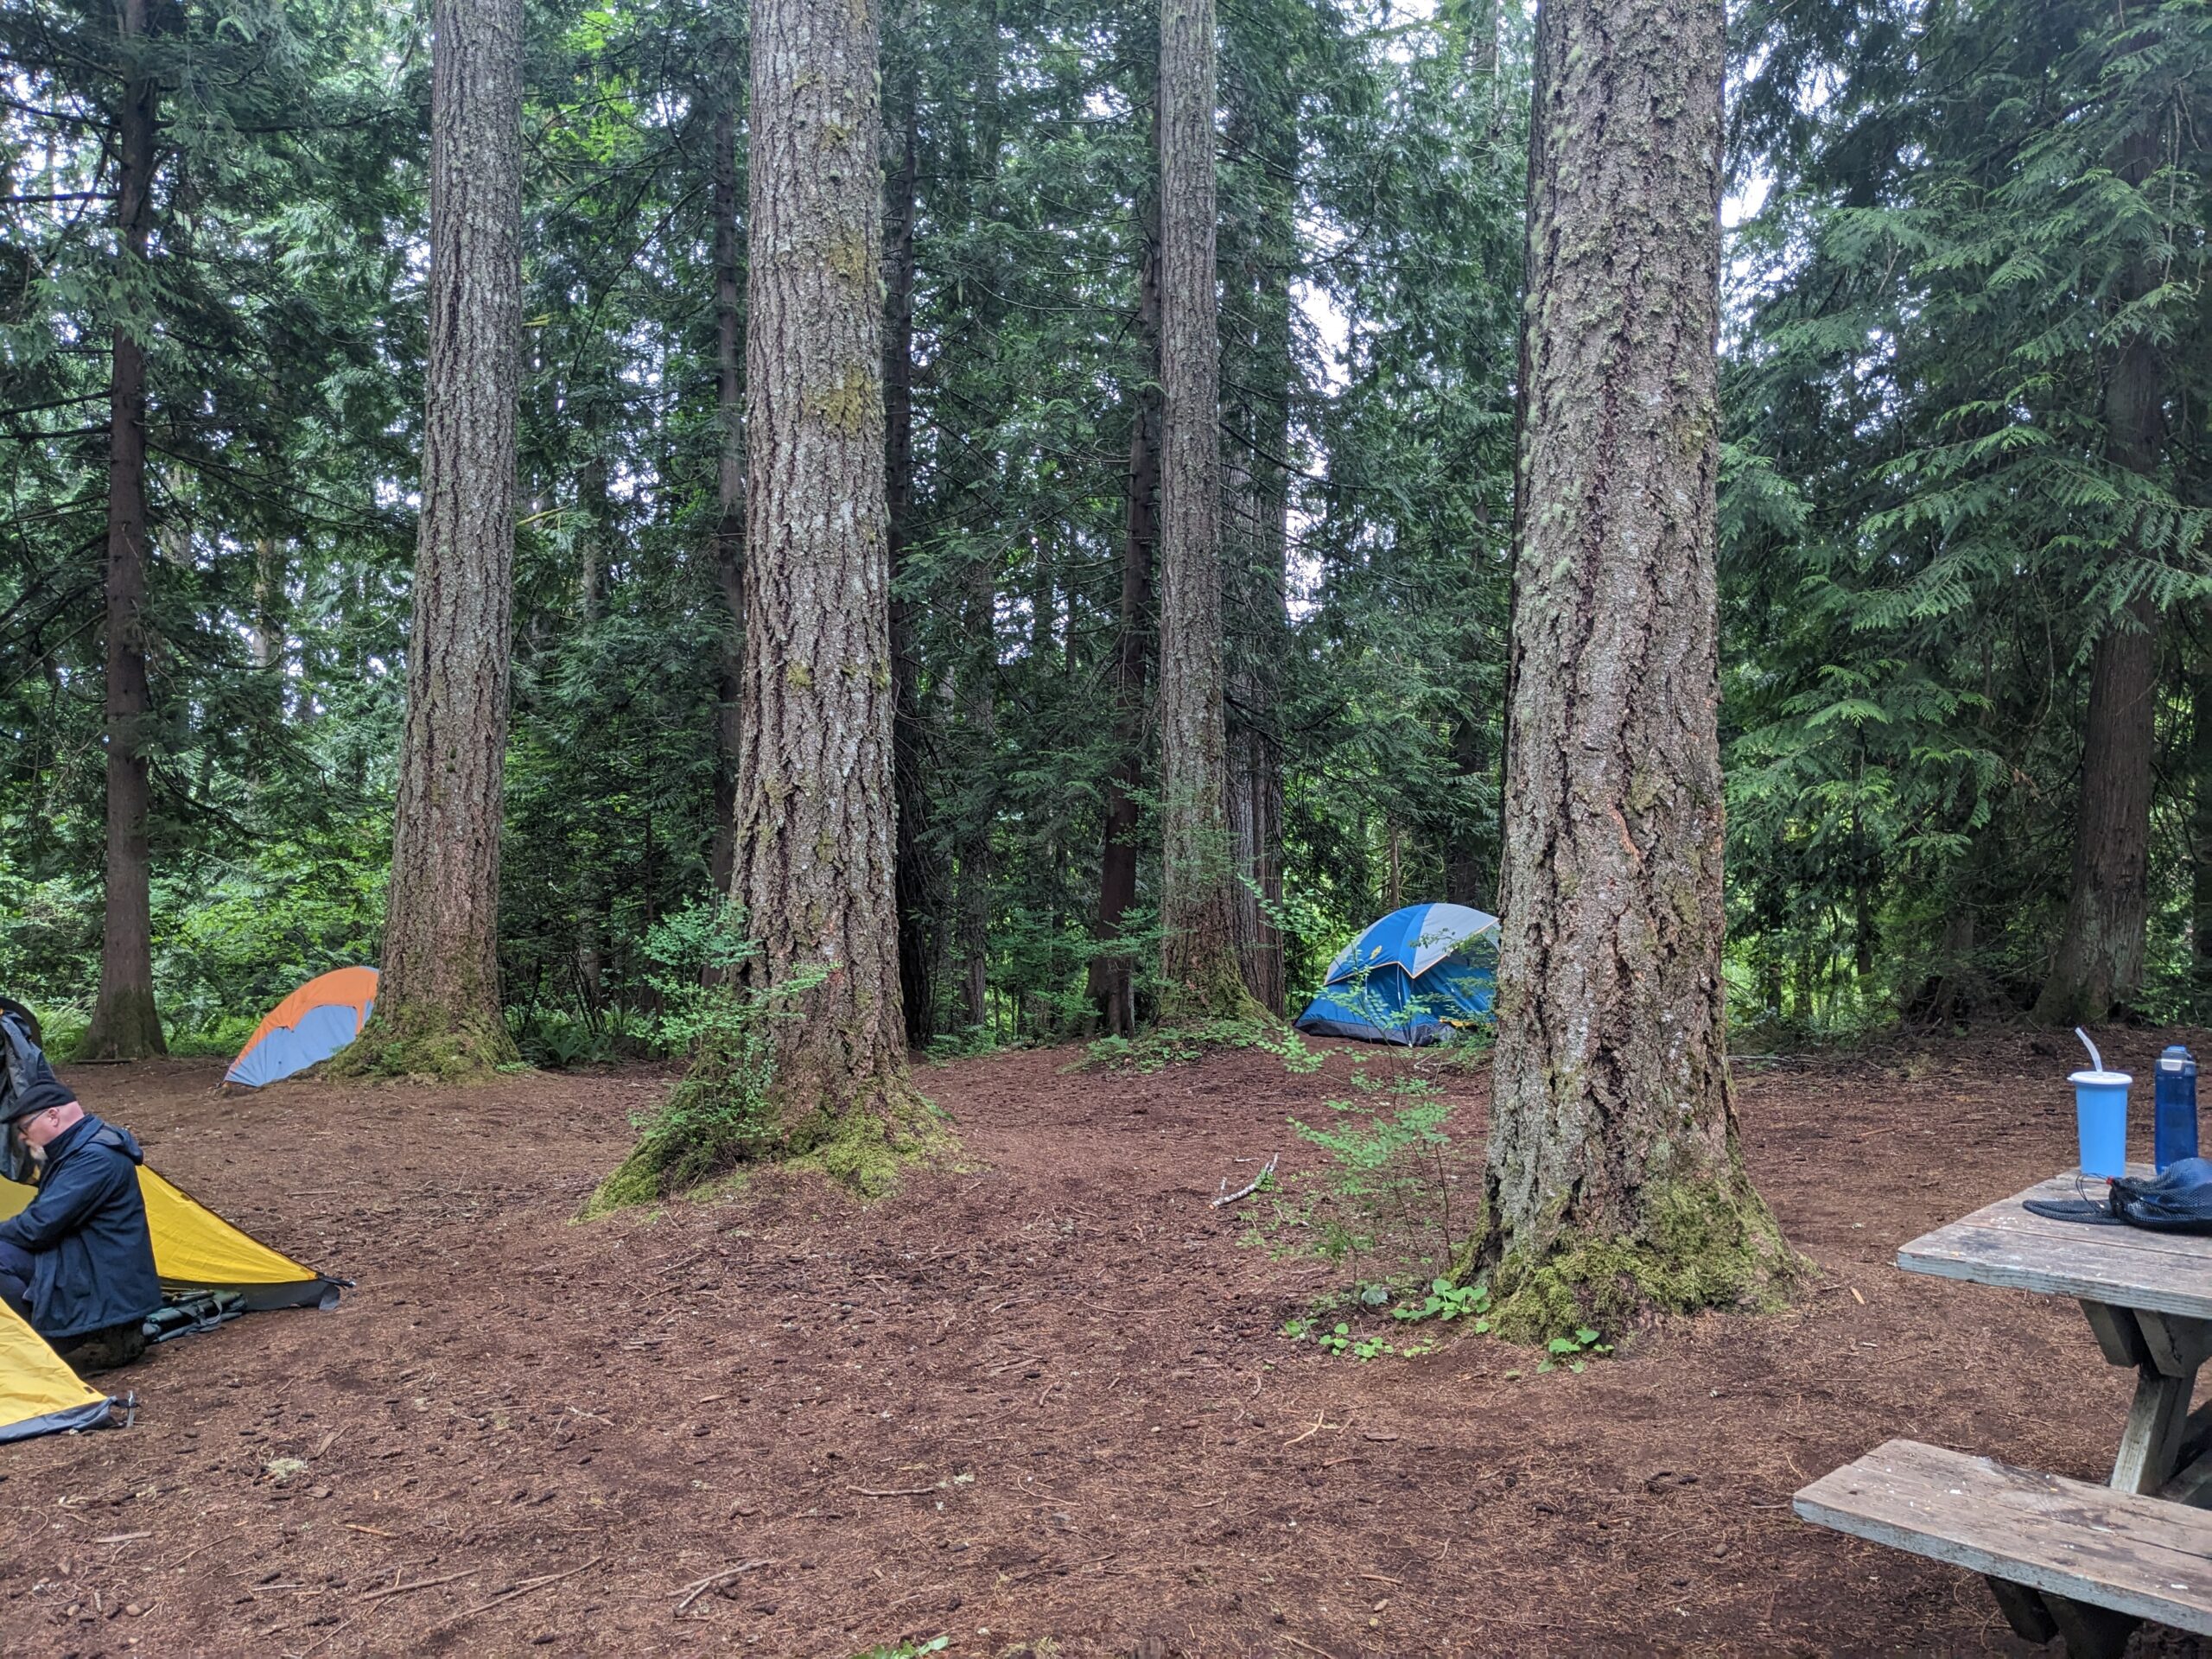 Tents set up in the woods